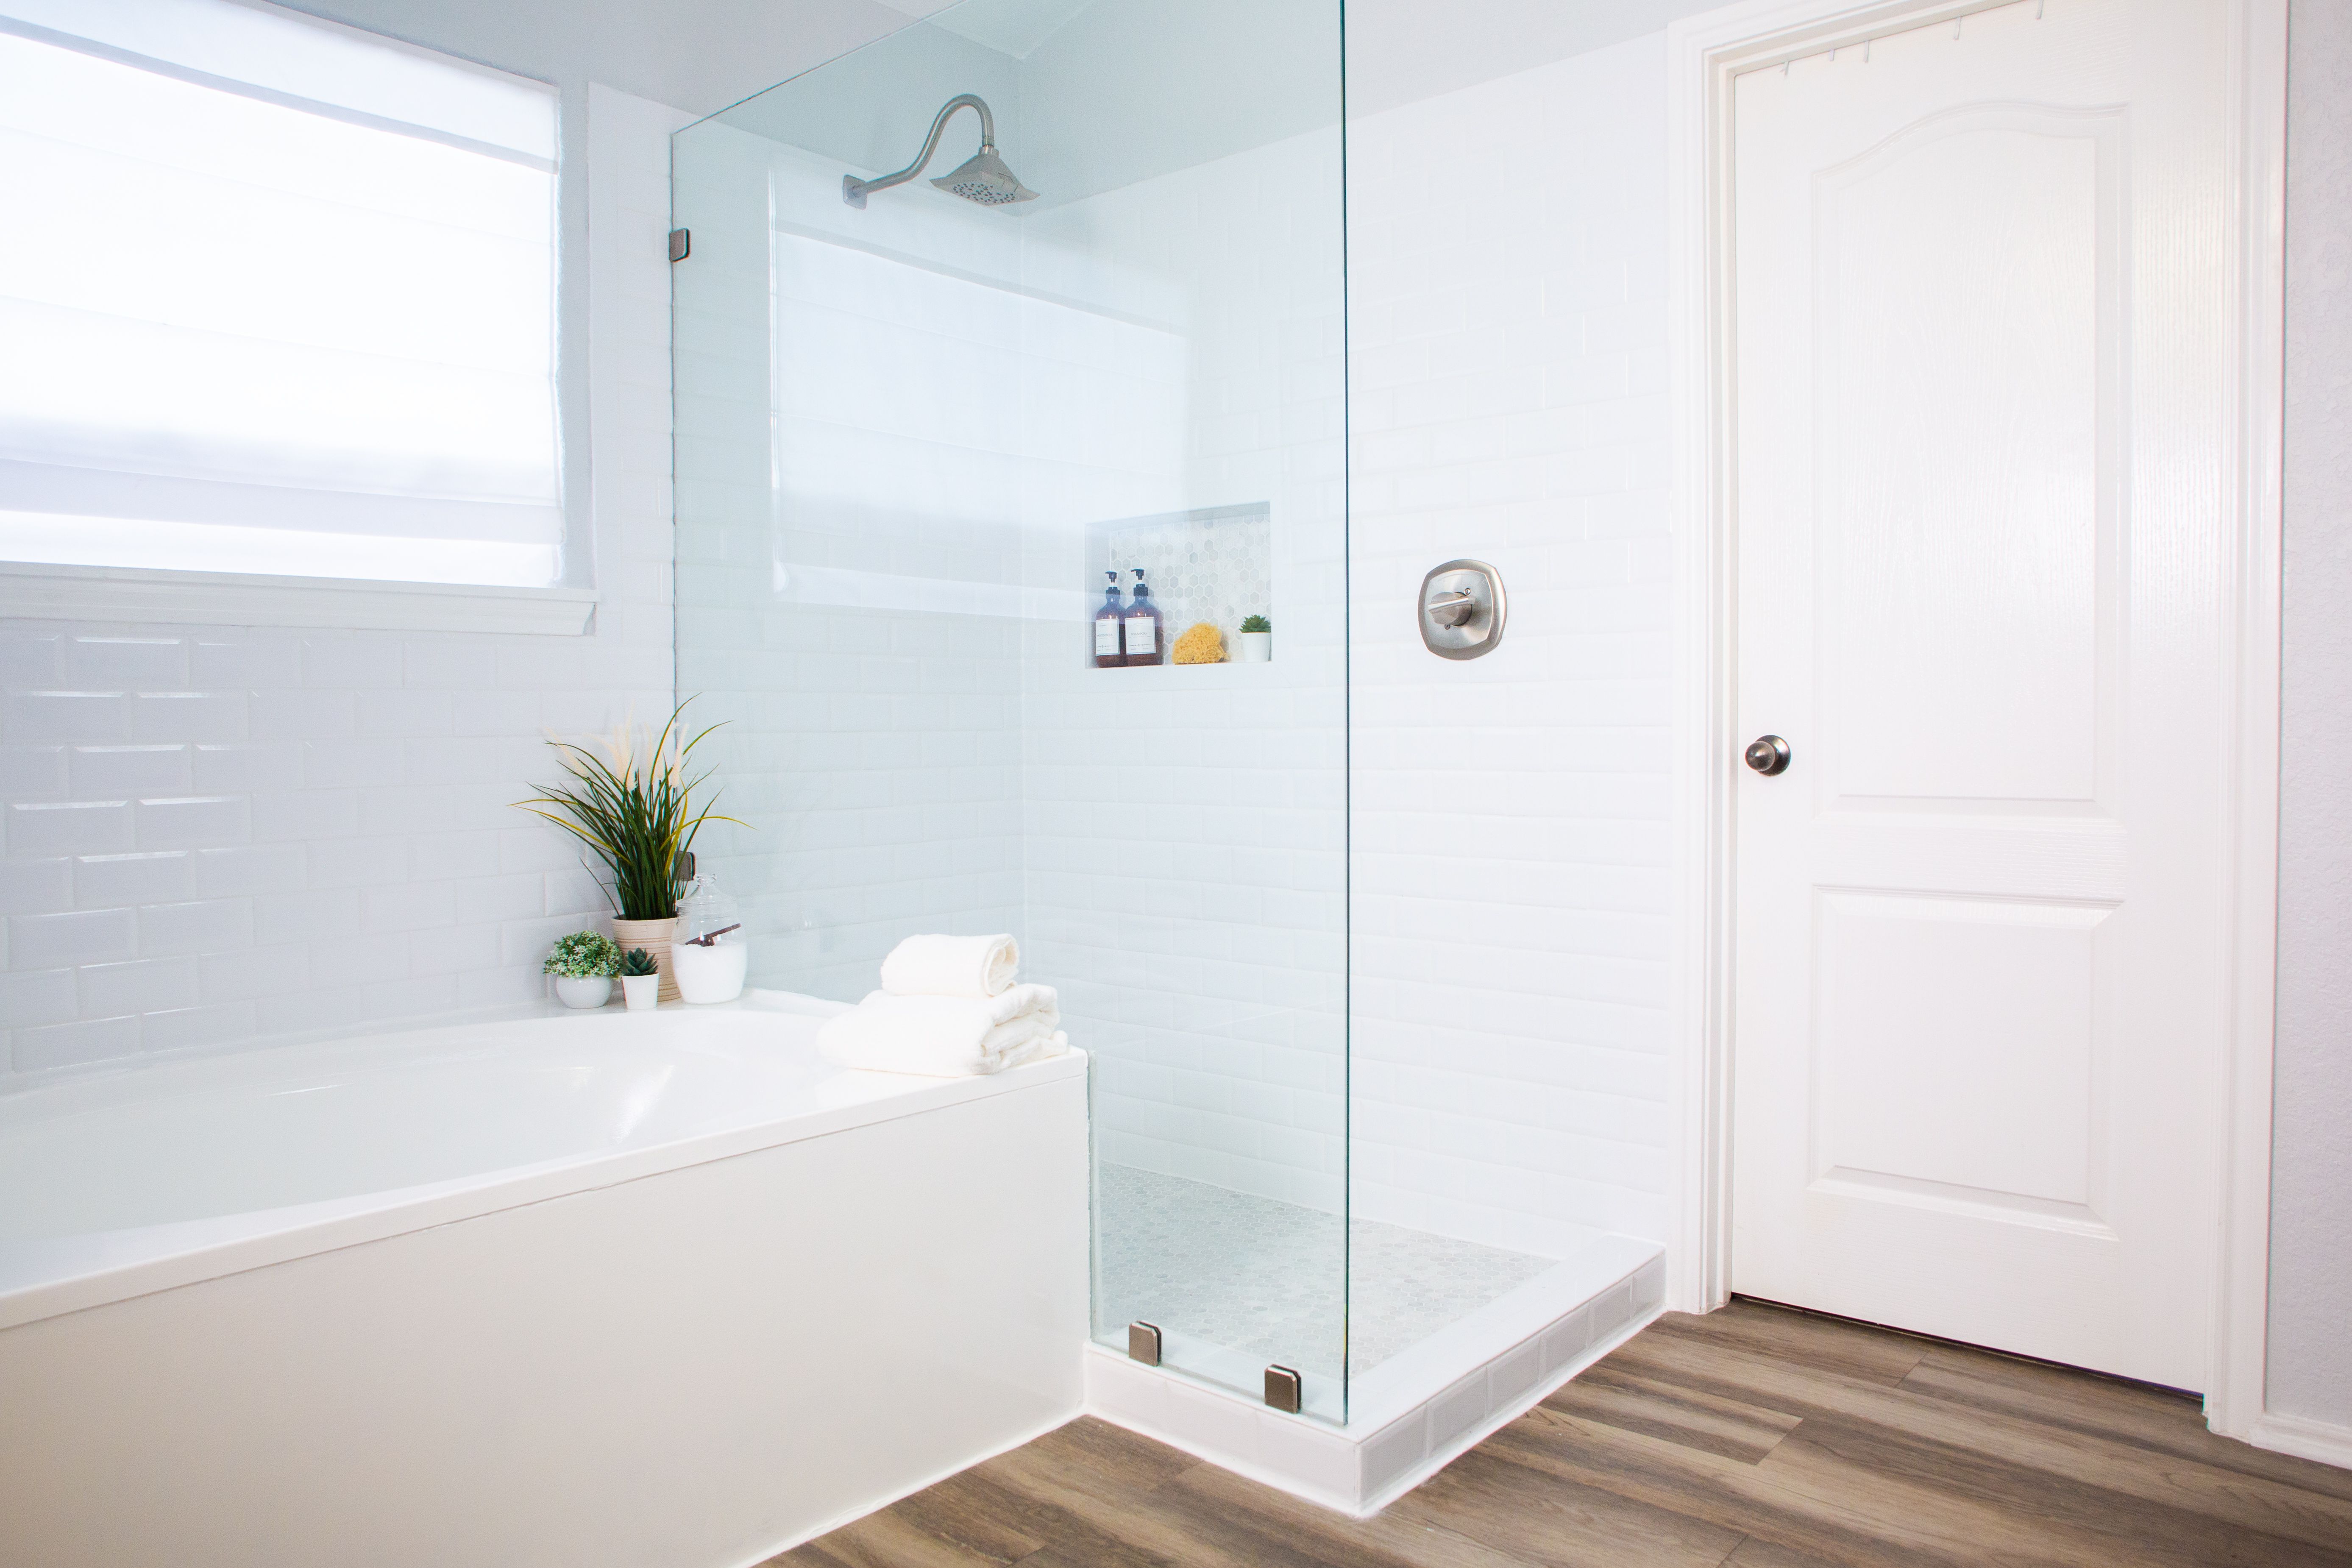 30 Shower Ideas That Work for Any Bathroom